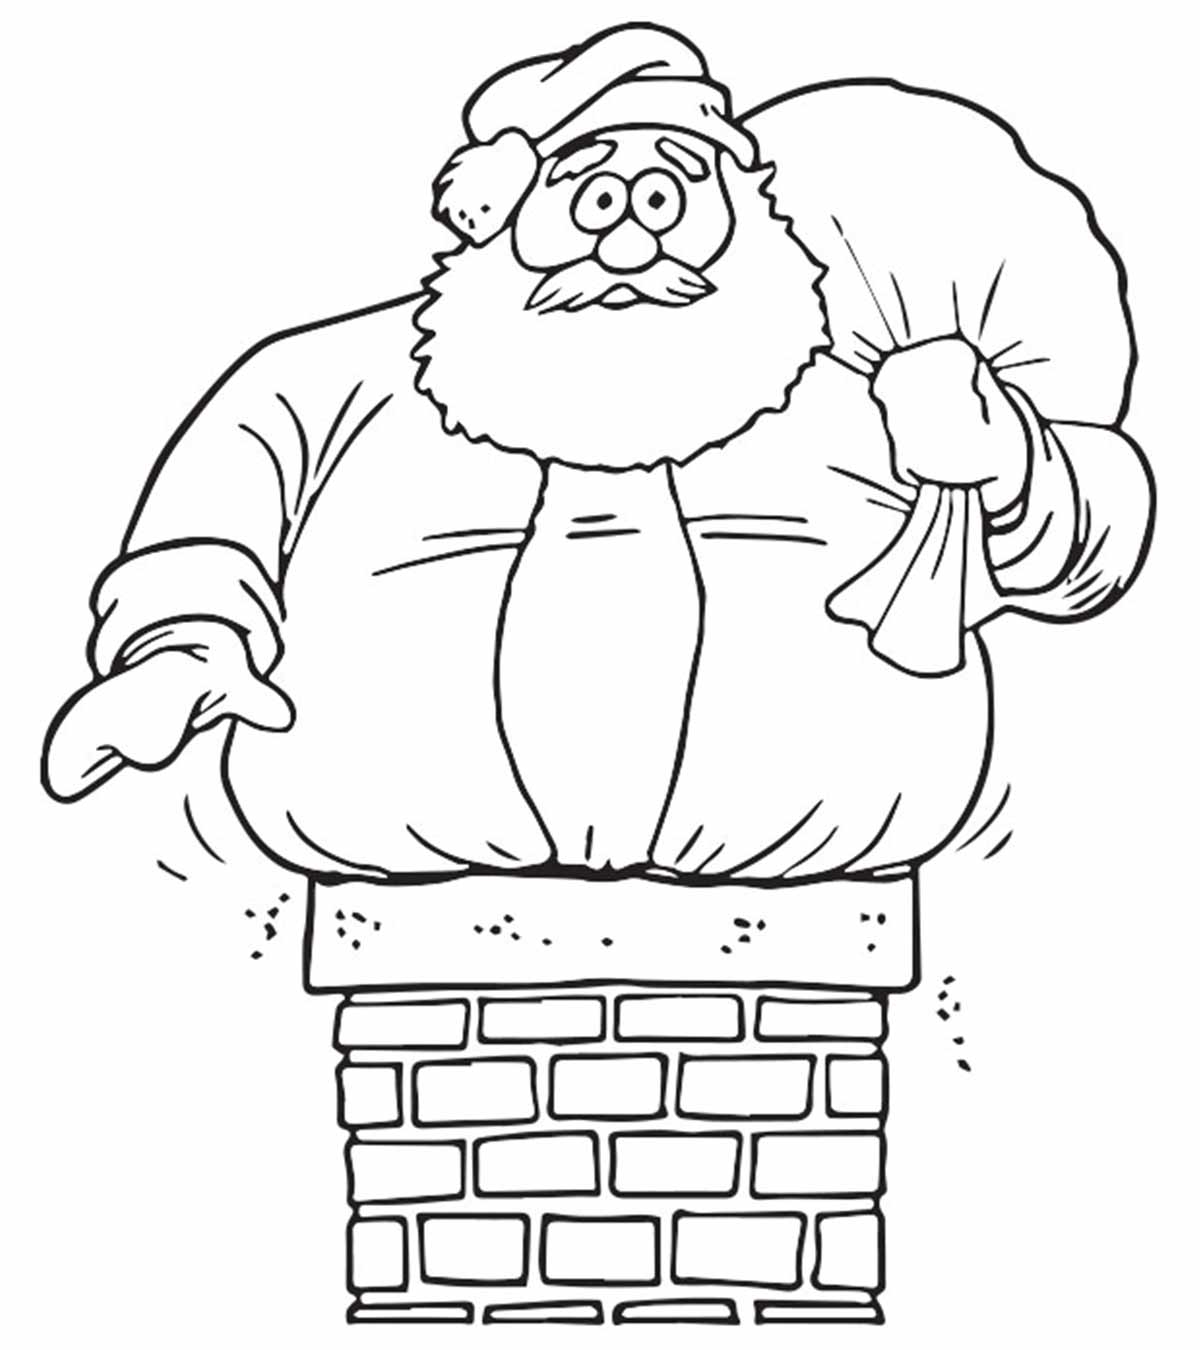 30 Cute Santa Claus Coloring Pages For Your Little Ones